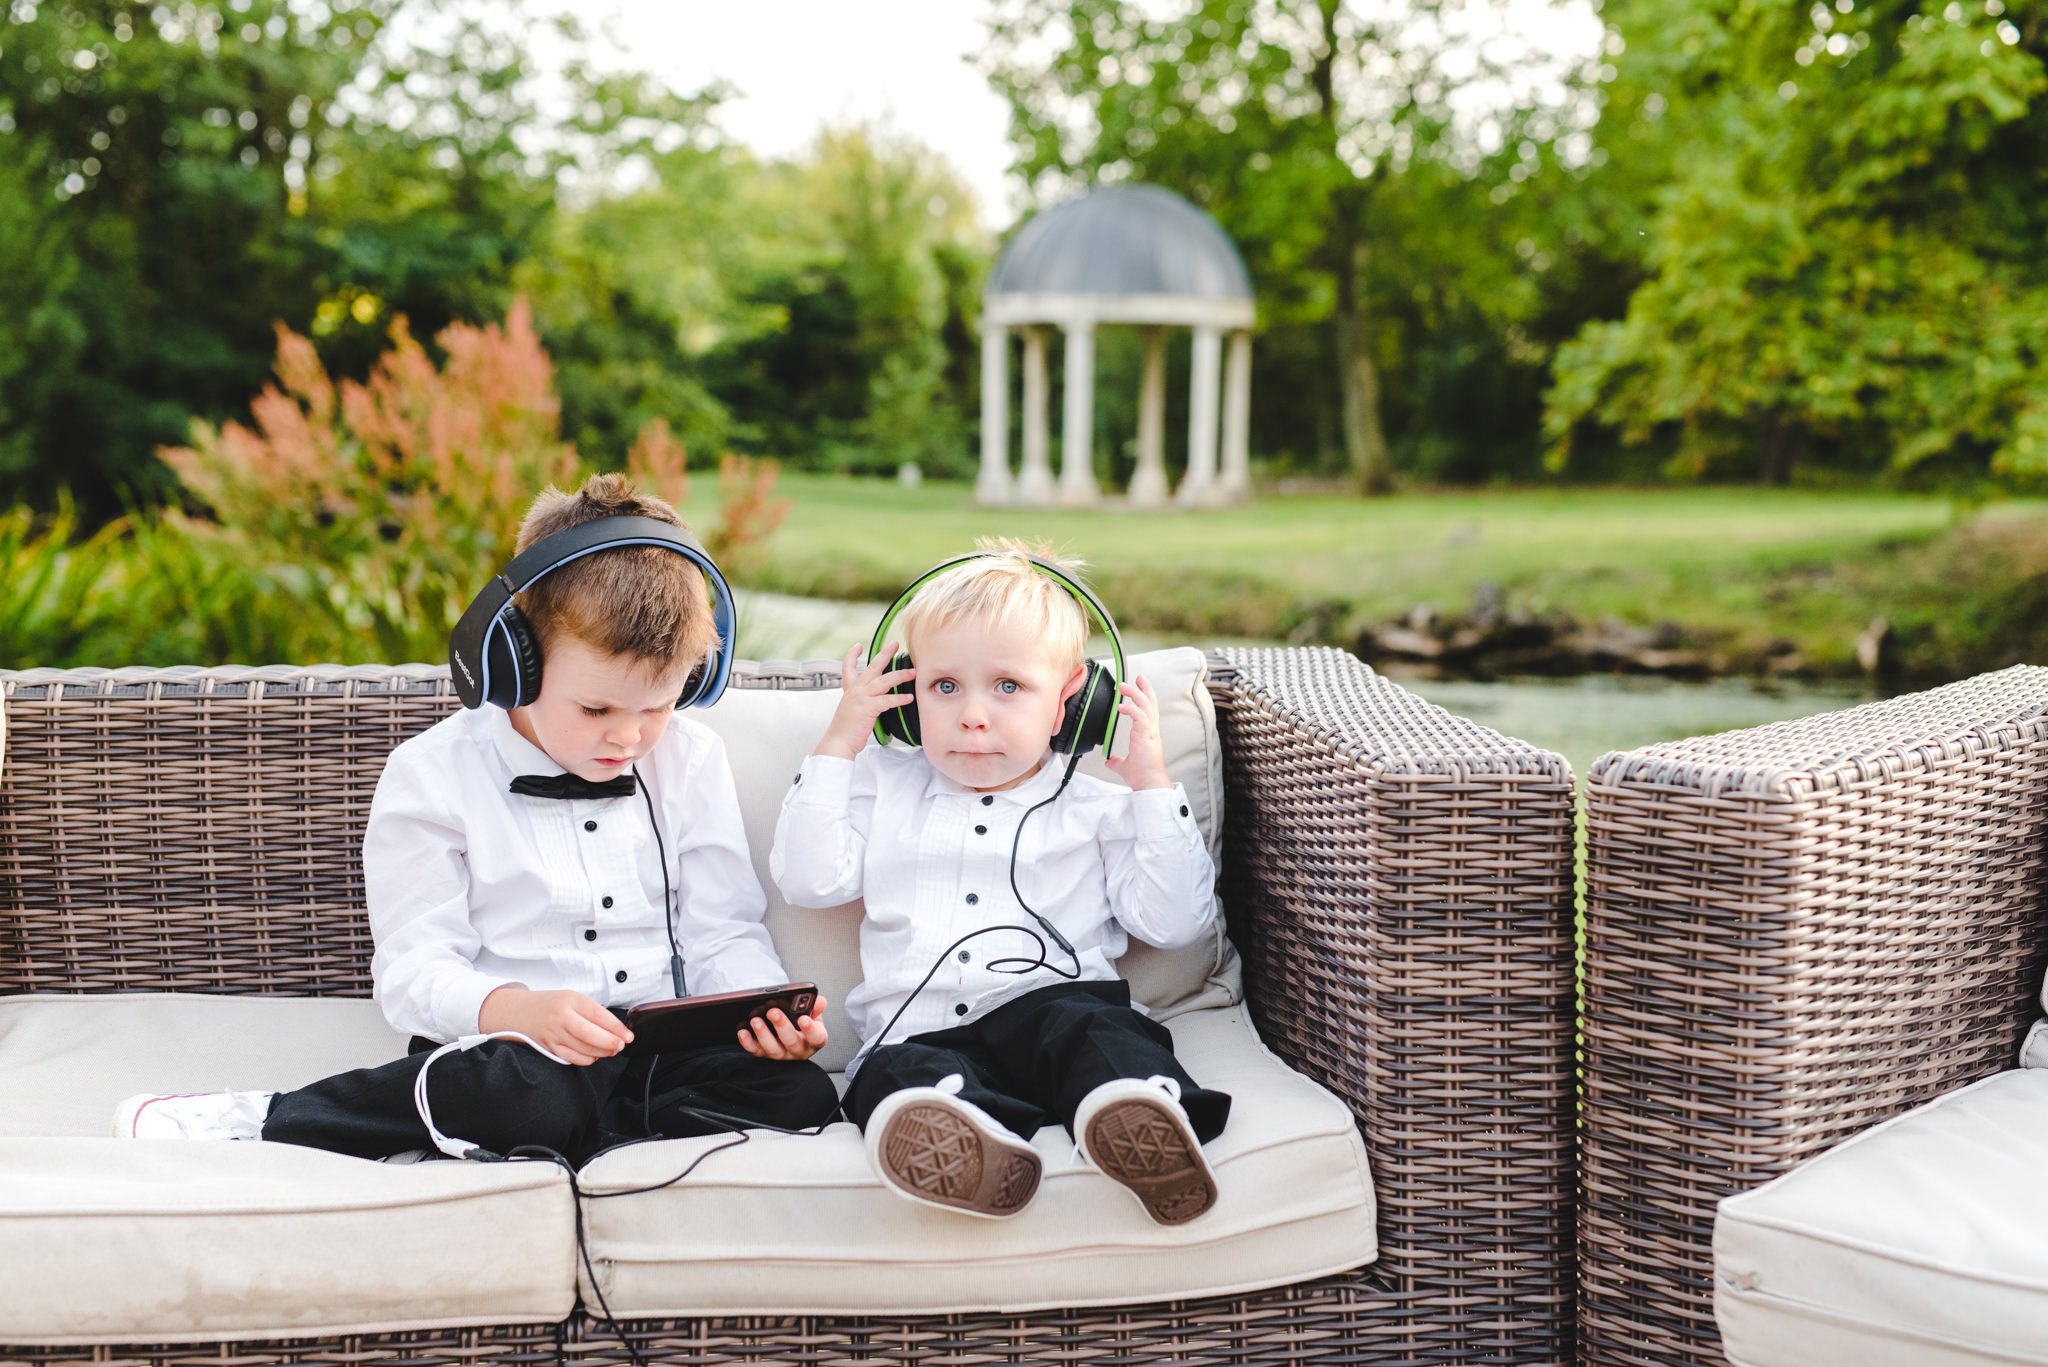 Children at a wedding with headphones on during the speeches